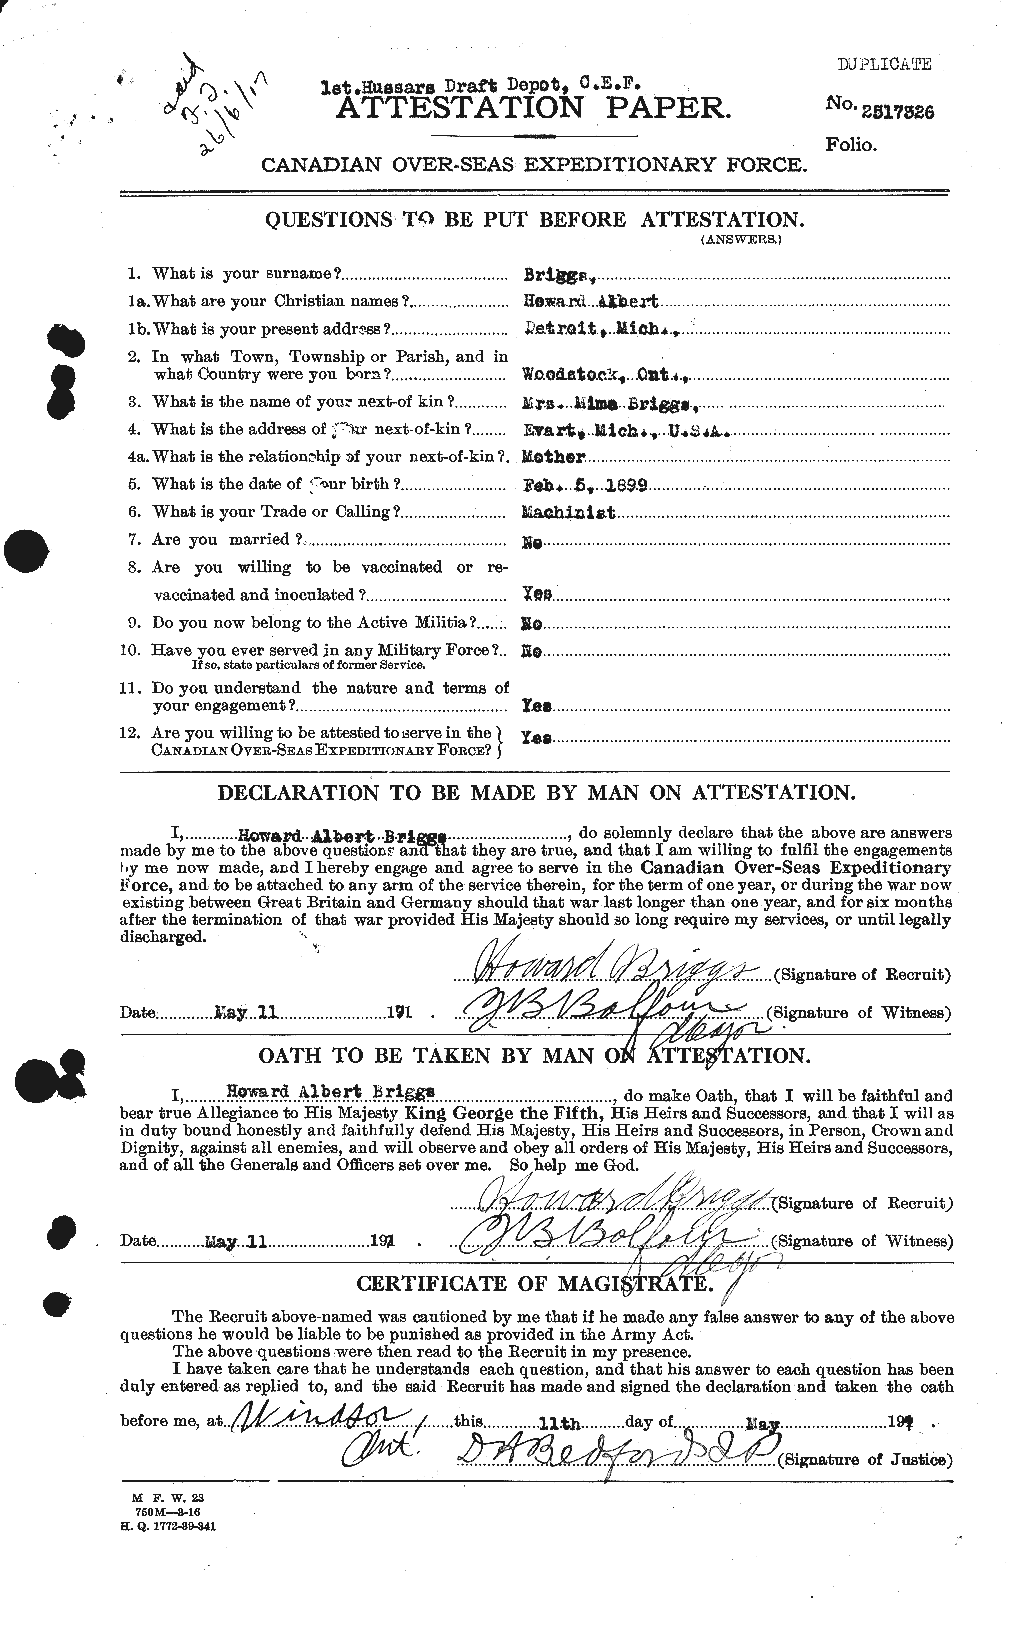 Personnel Records of the First World War - CEF 264034a